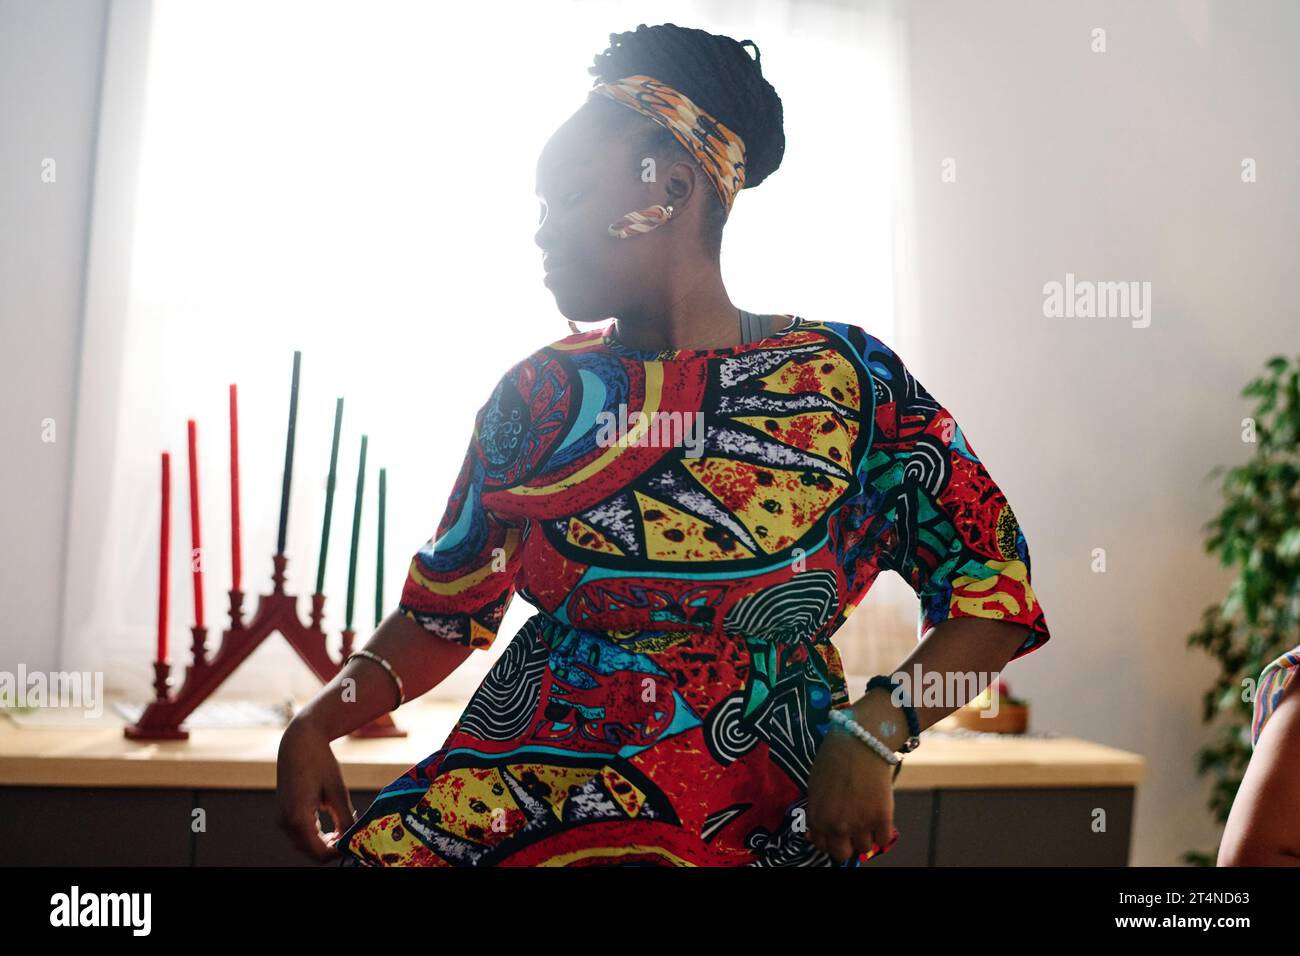 Young African American woman in ethnic attire and accessories performing national dance by table with seven candles symbolizing main principles Stock Photo